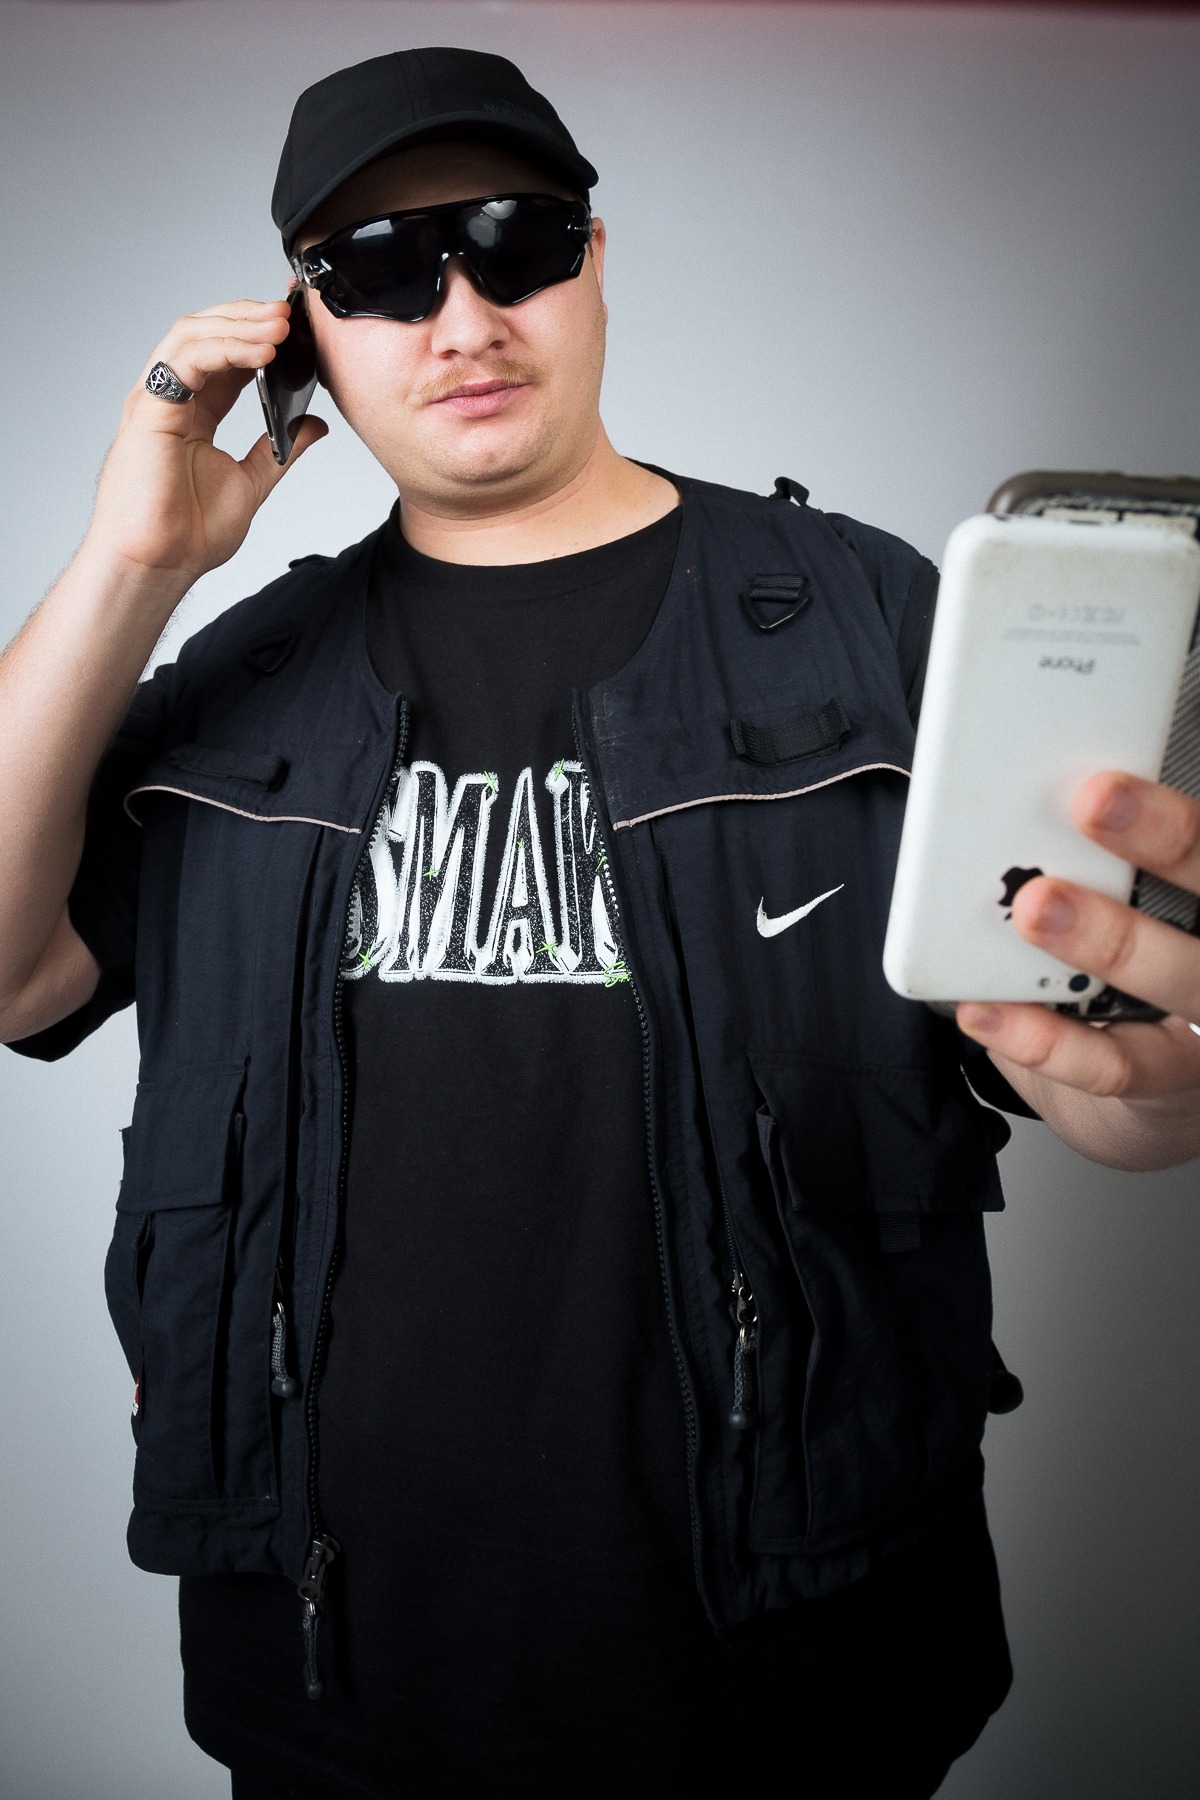 A man holds a phone while modelling Smak (Rapper) merch